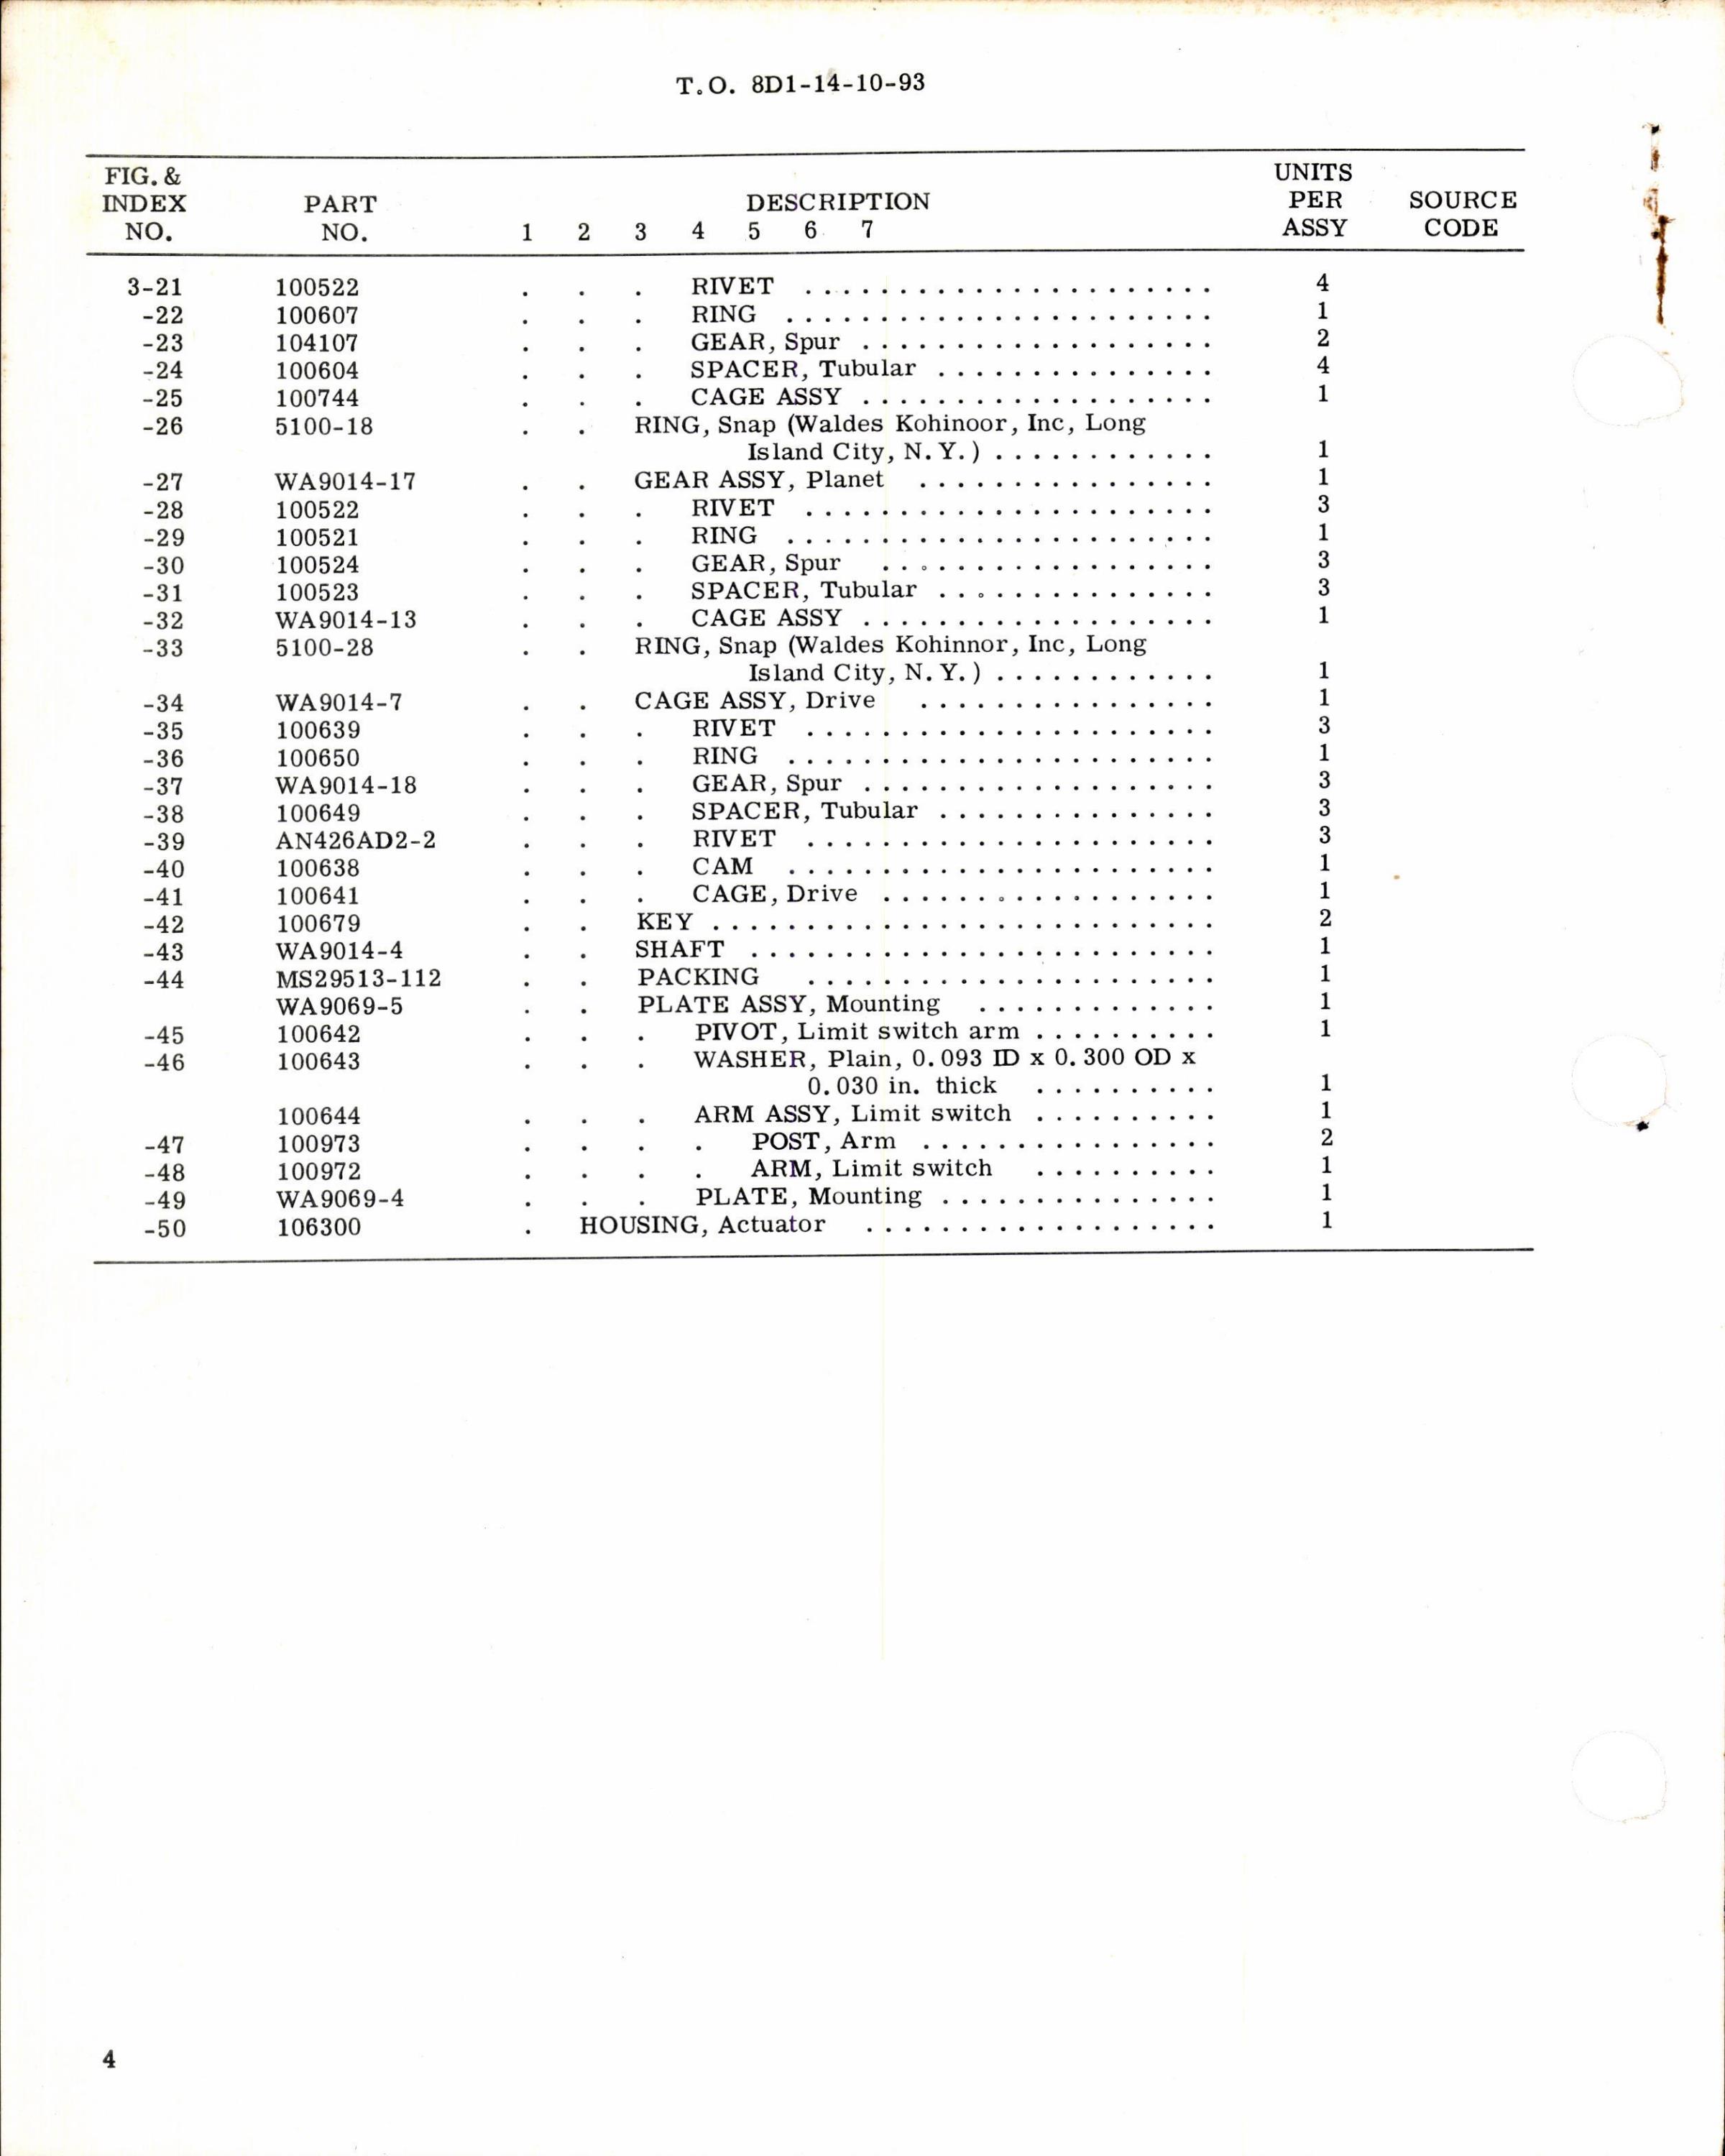 Sample page 4 from AirCorps Library document: Instructions w Parts Breakdown for Actuator Assembly Part 108392